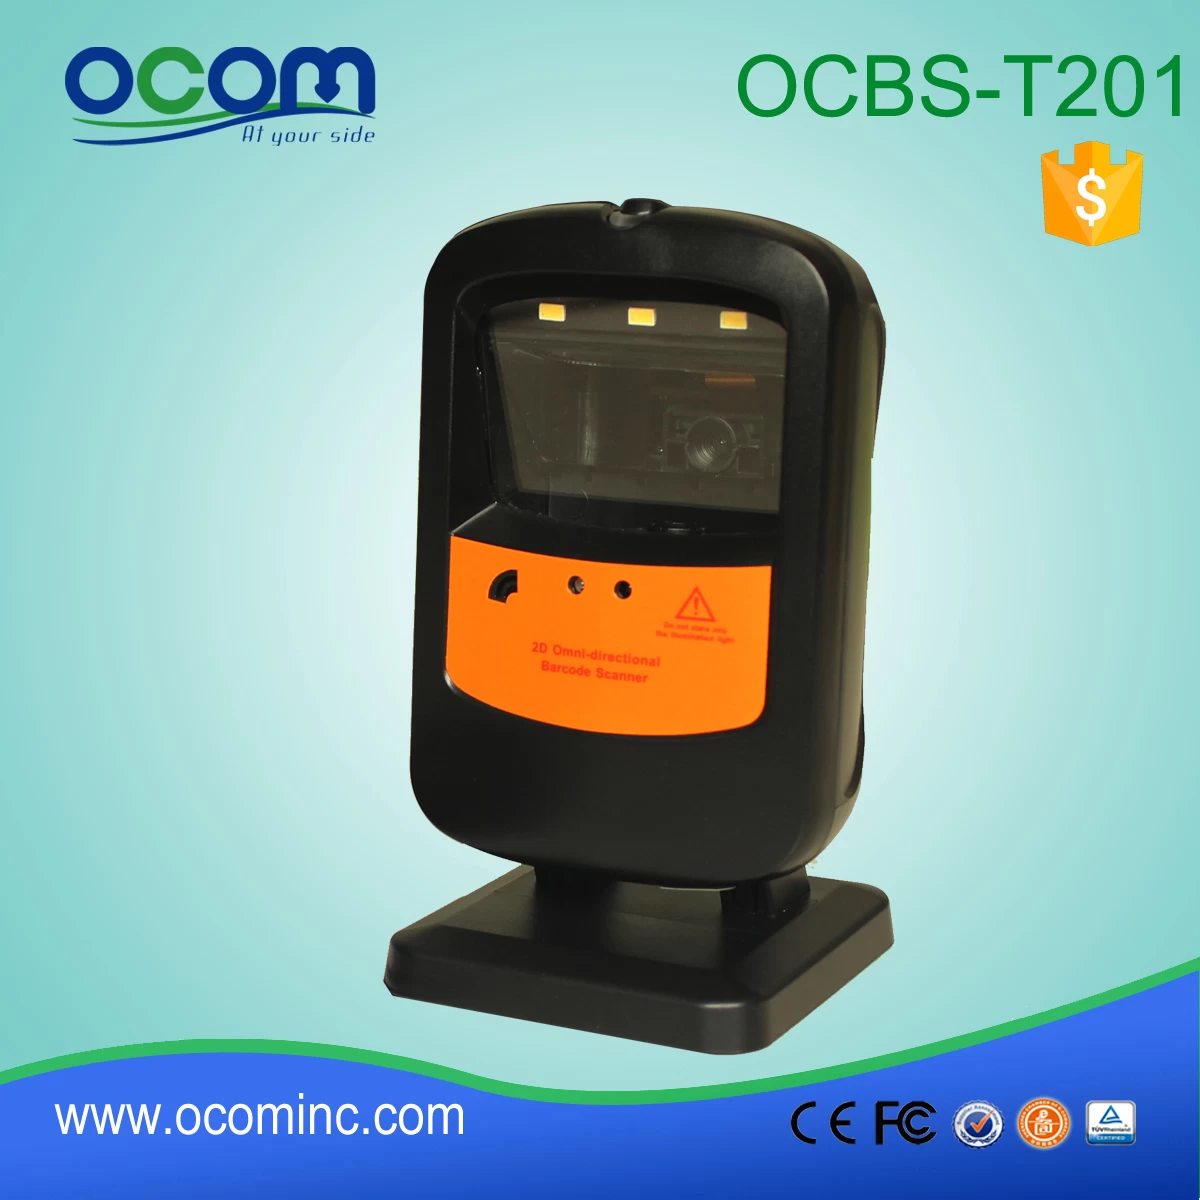 OCBS-T201:long distance barcode scanner mini usb, barcode reader price